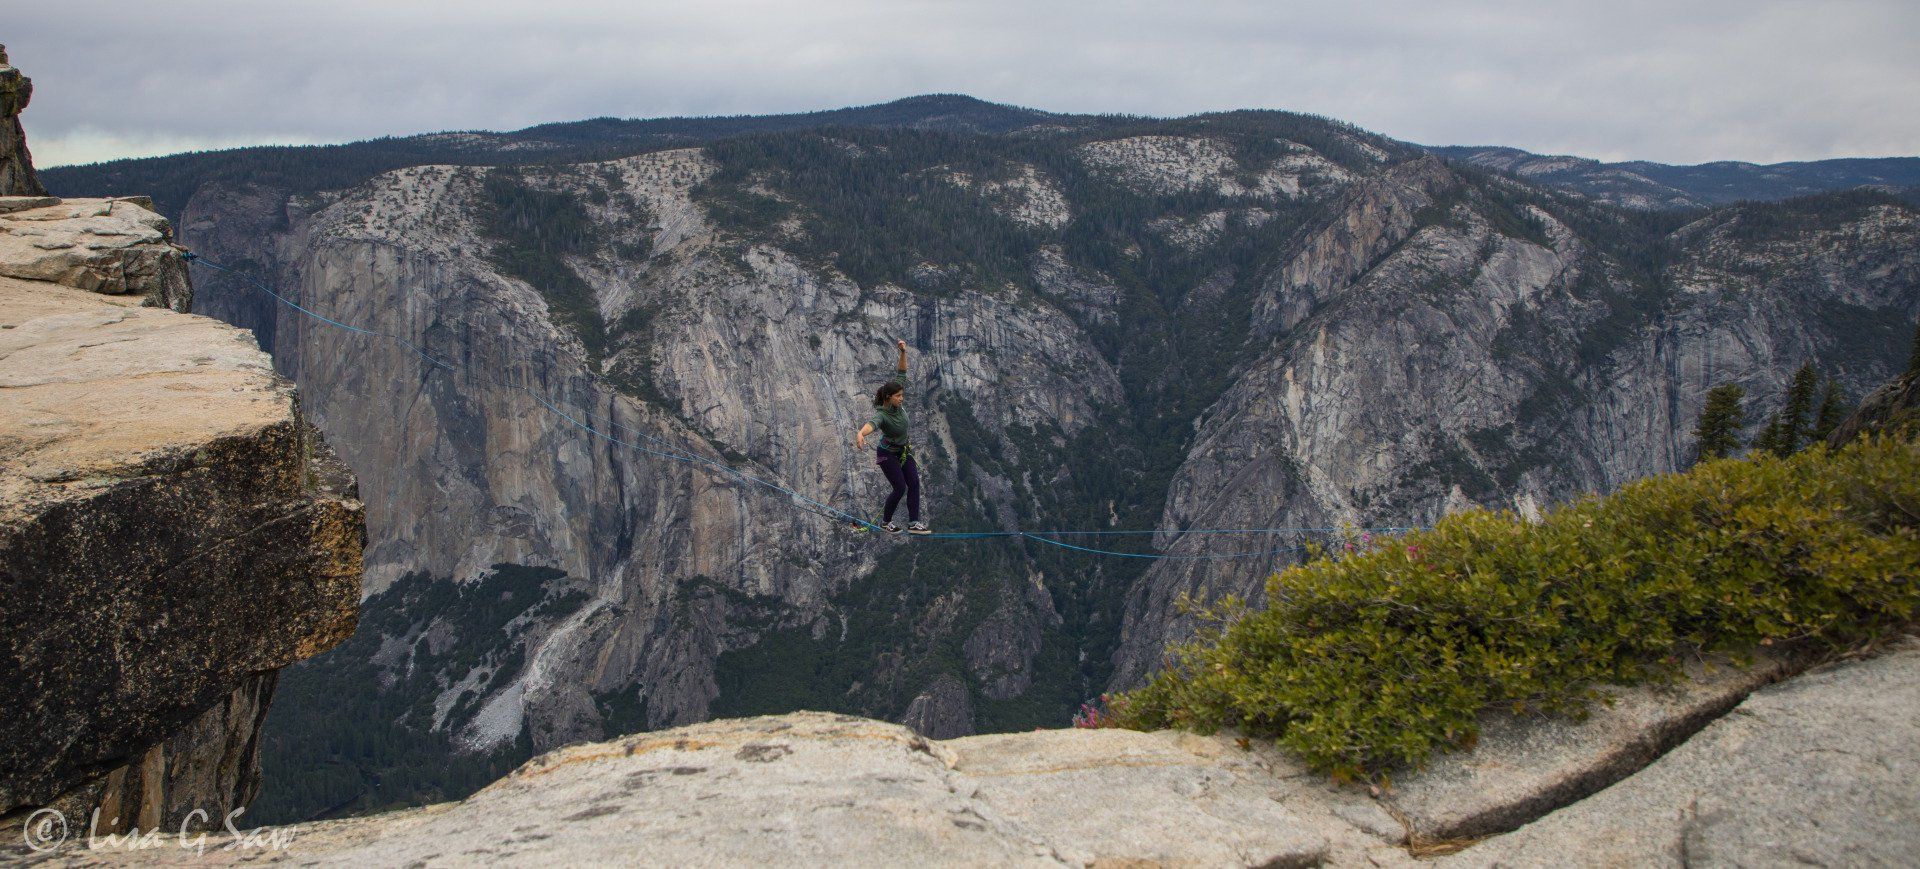 Tightrope walker at Taft Point in Yosemite National Park